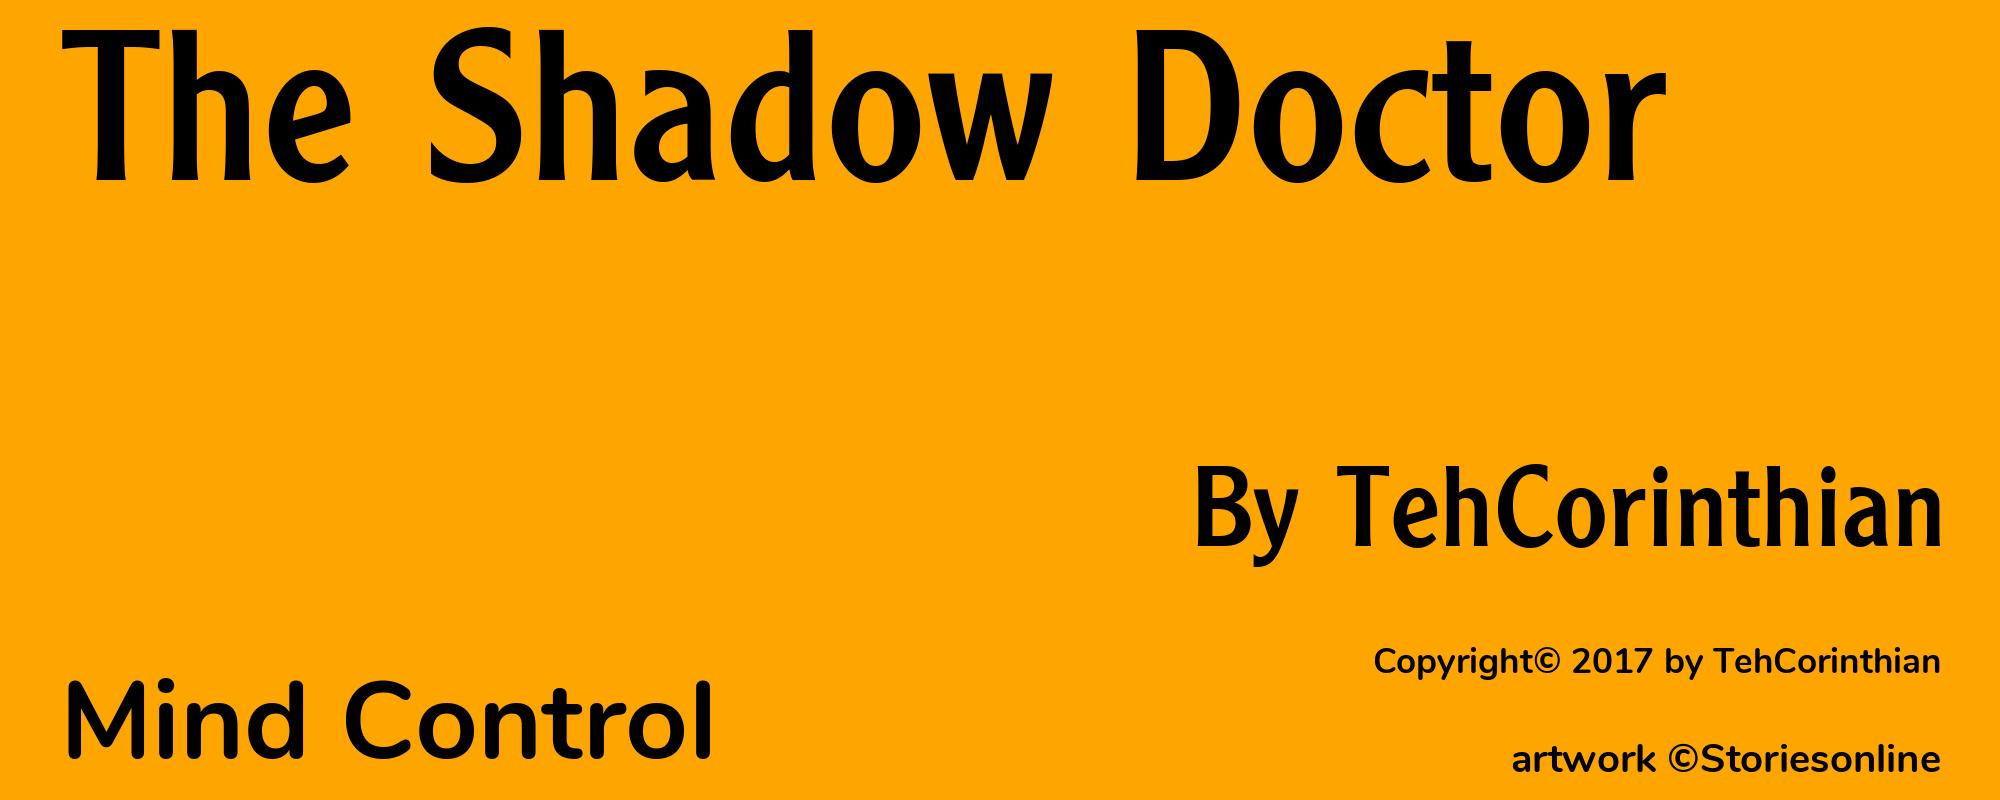 The Shadow Doctor - Cover